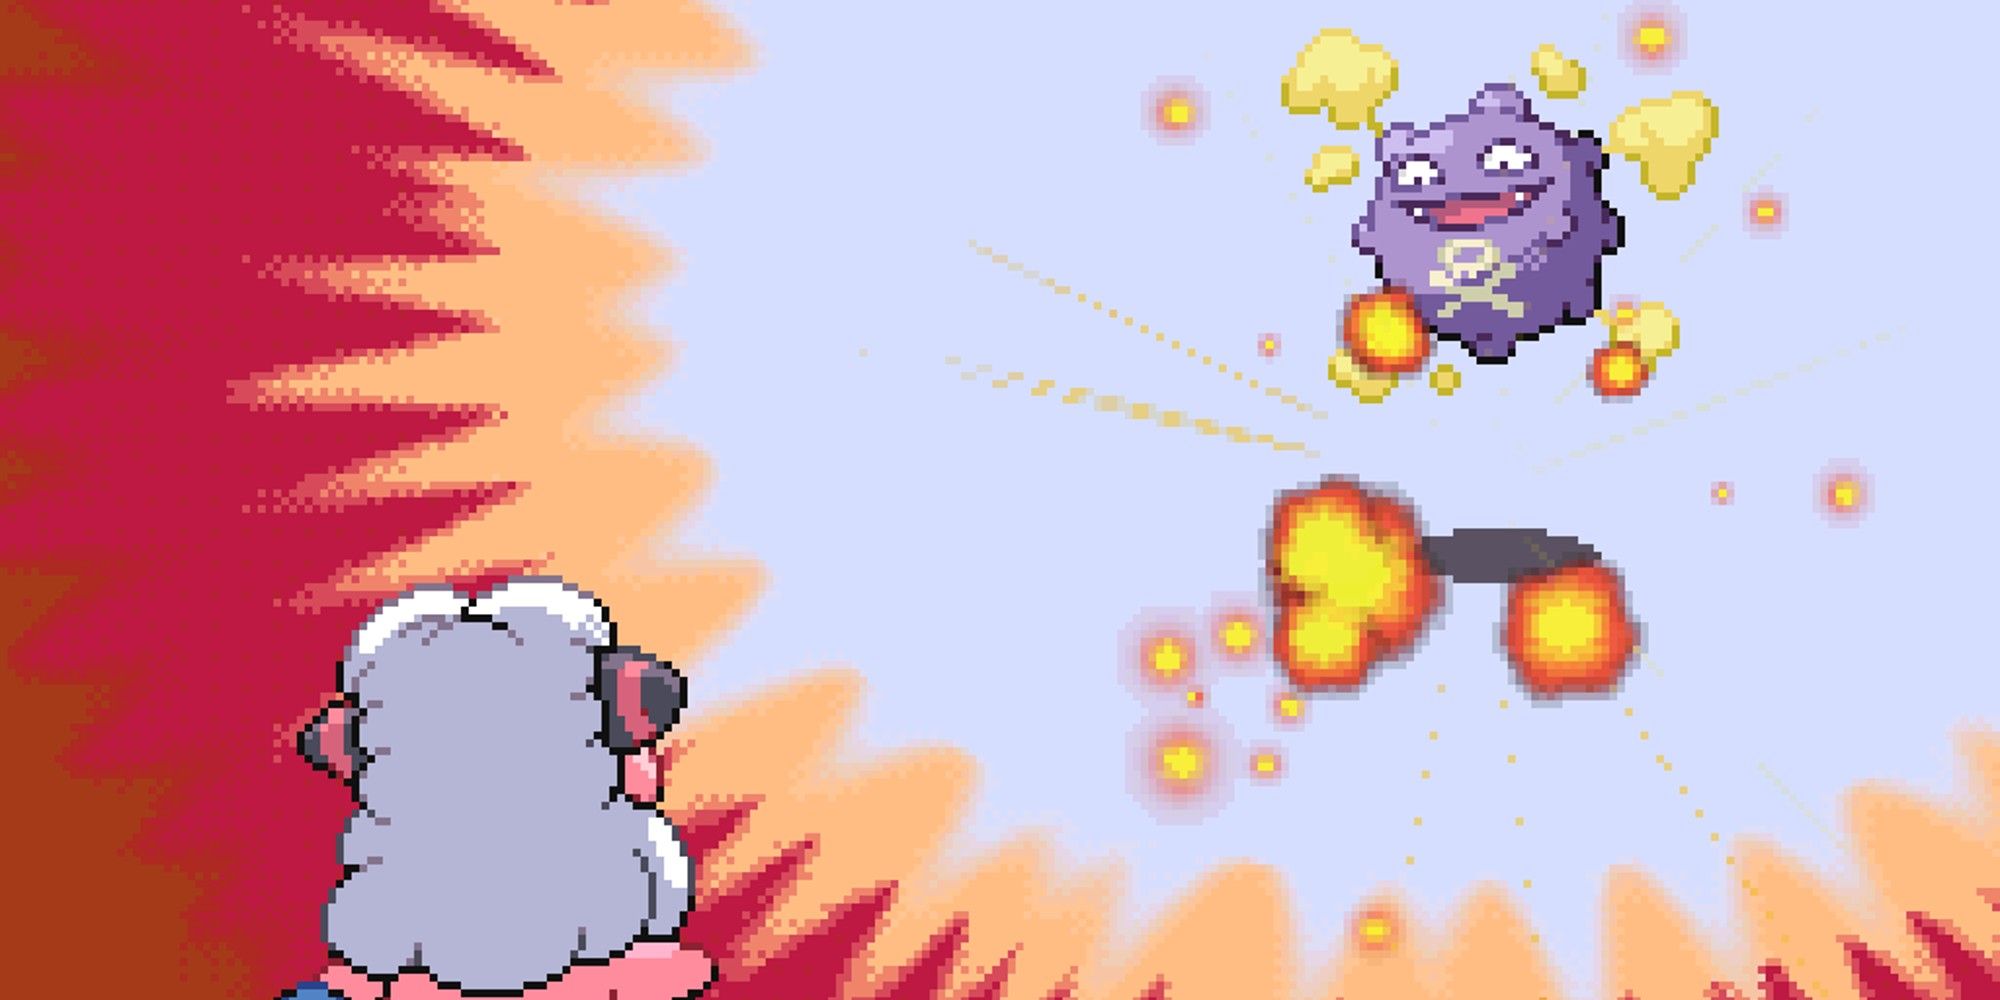 Self-Destruct from Pokemon Heart Gold and Soul Silver, Koffing using it on Flaaffy